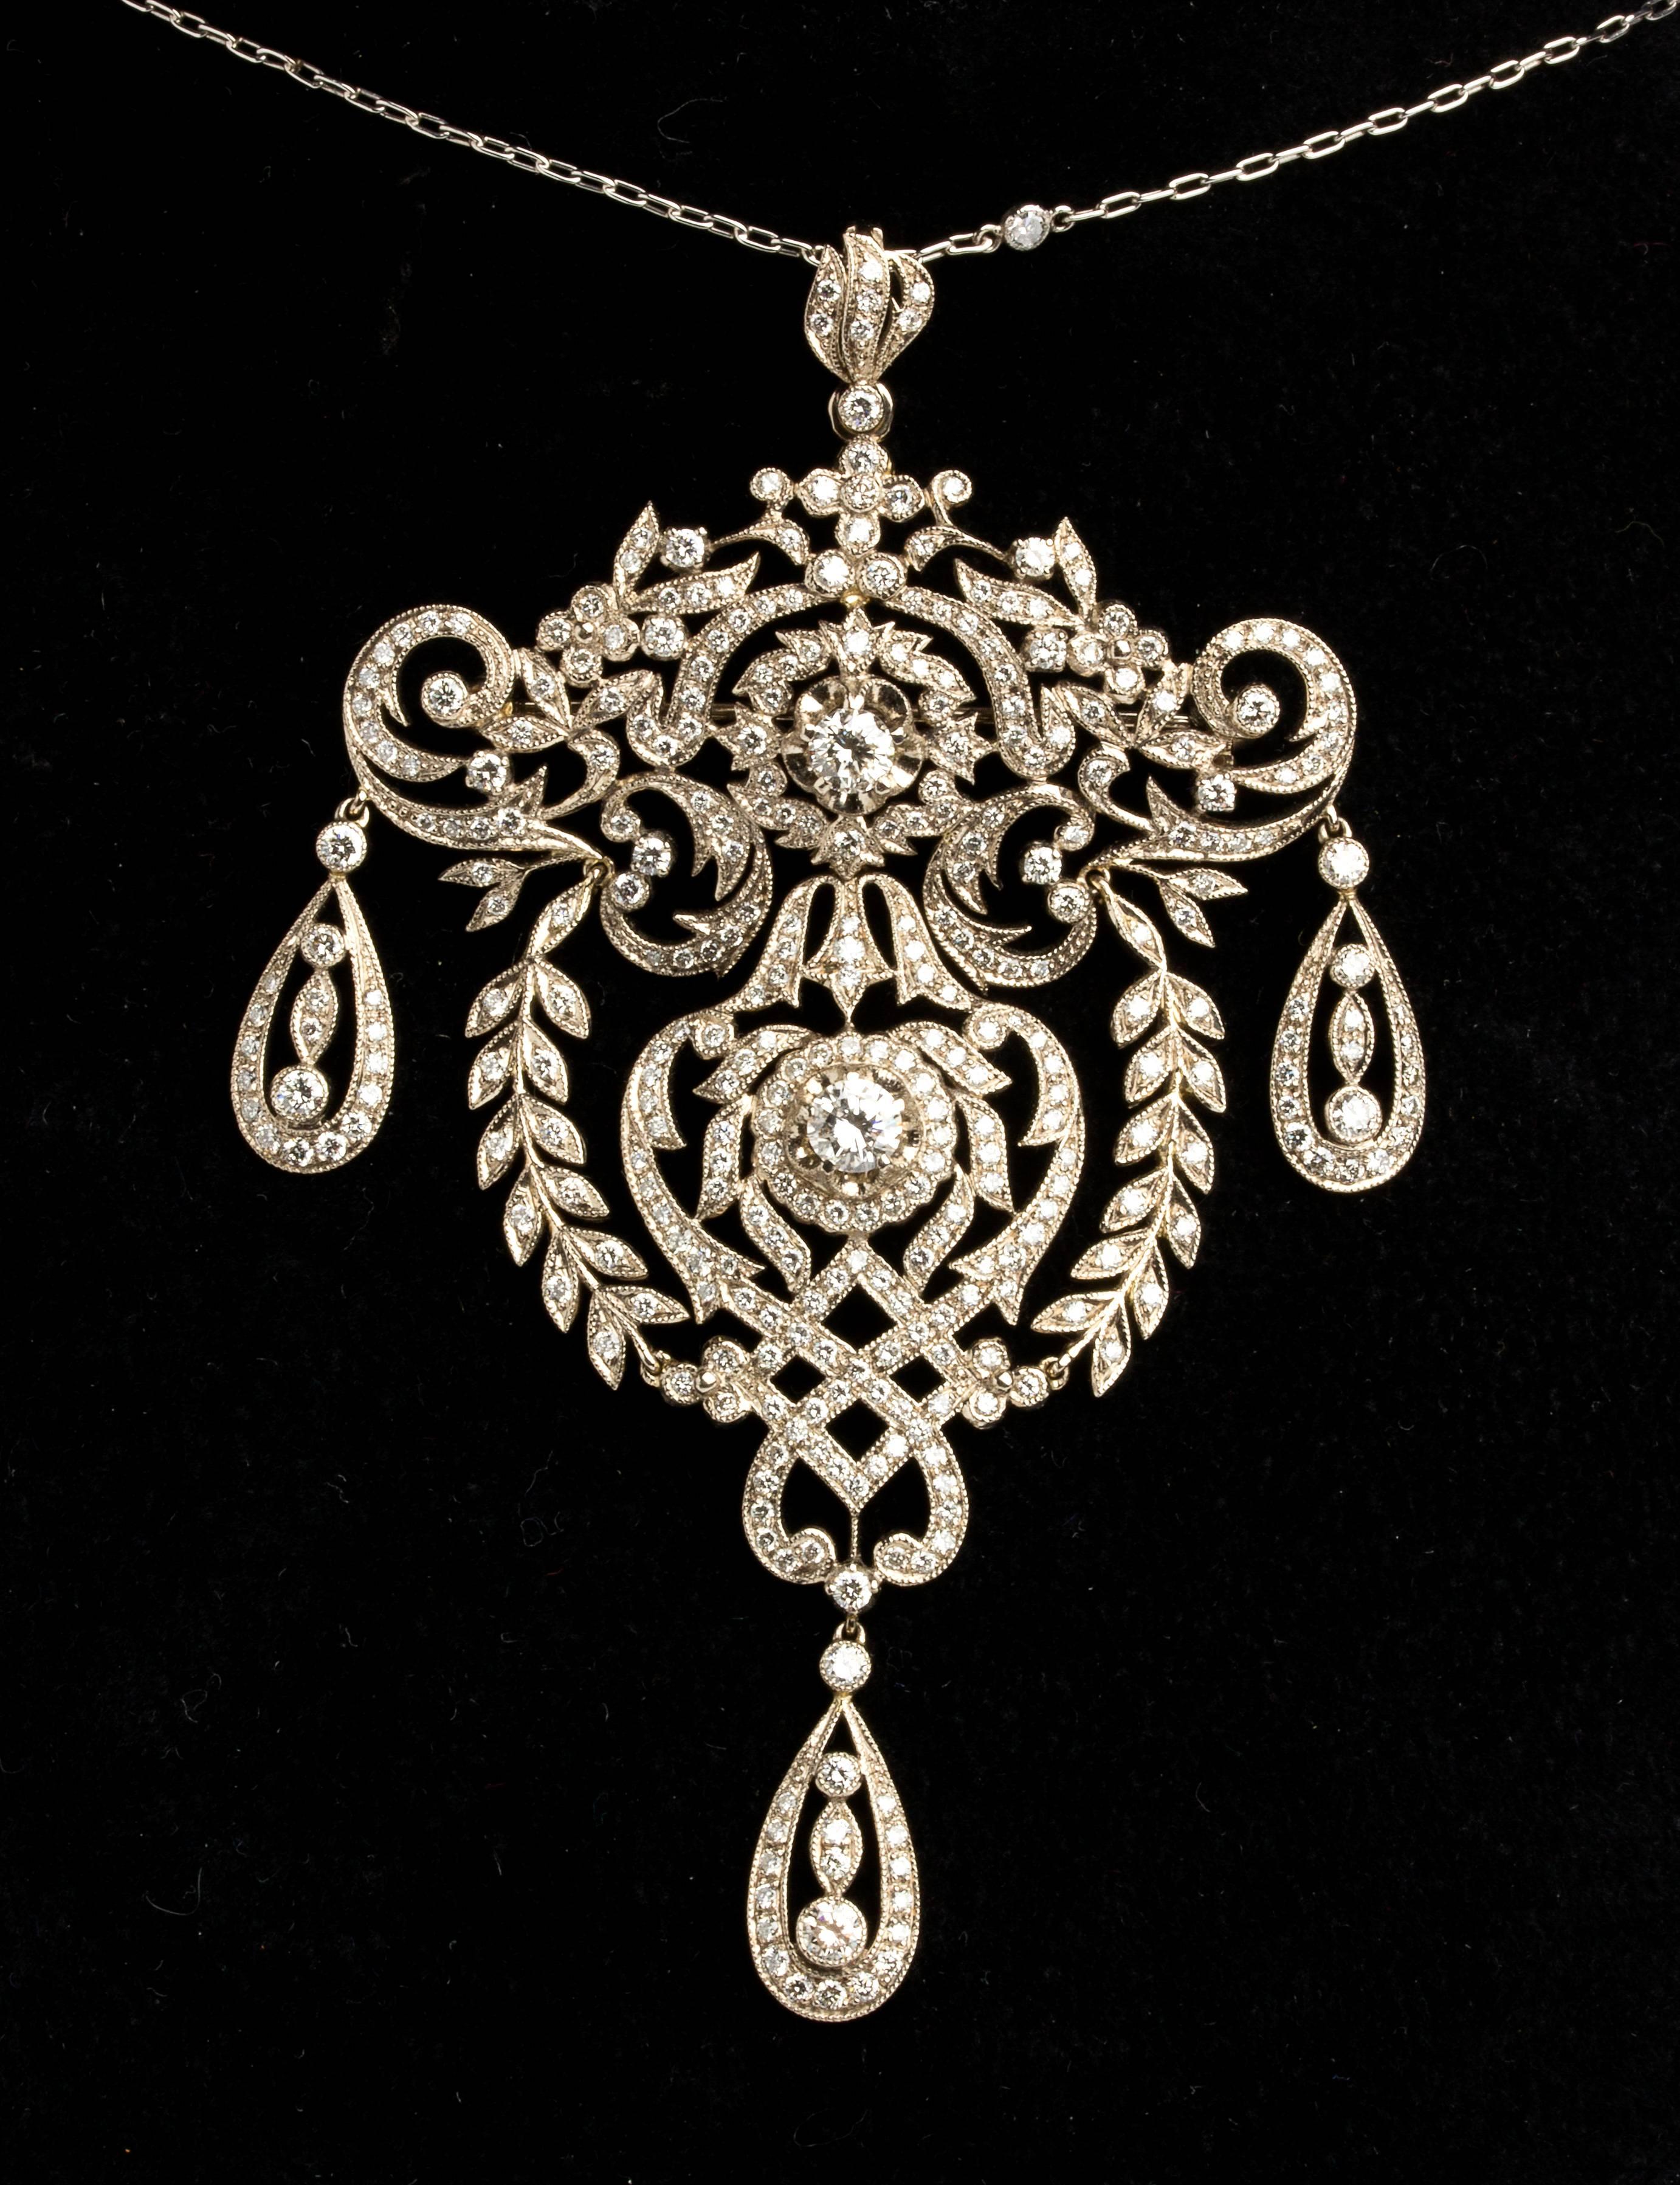 Comprising: a necklace and a pair of earrings finely made with floreal motif embellished with diamonds, H/I color, SI clarity, weighing total 7.40 ct. Total lenght 445 mm (17 33⁄64), pendant lenght 80 mm (3 5⁄32 in), pendant width 50 mm (1 31⁄32